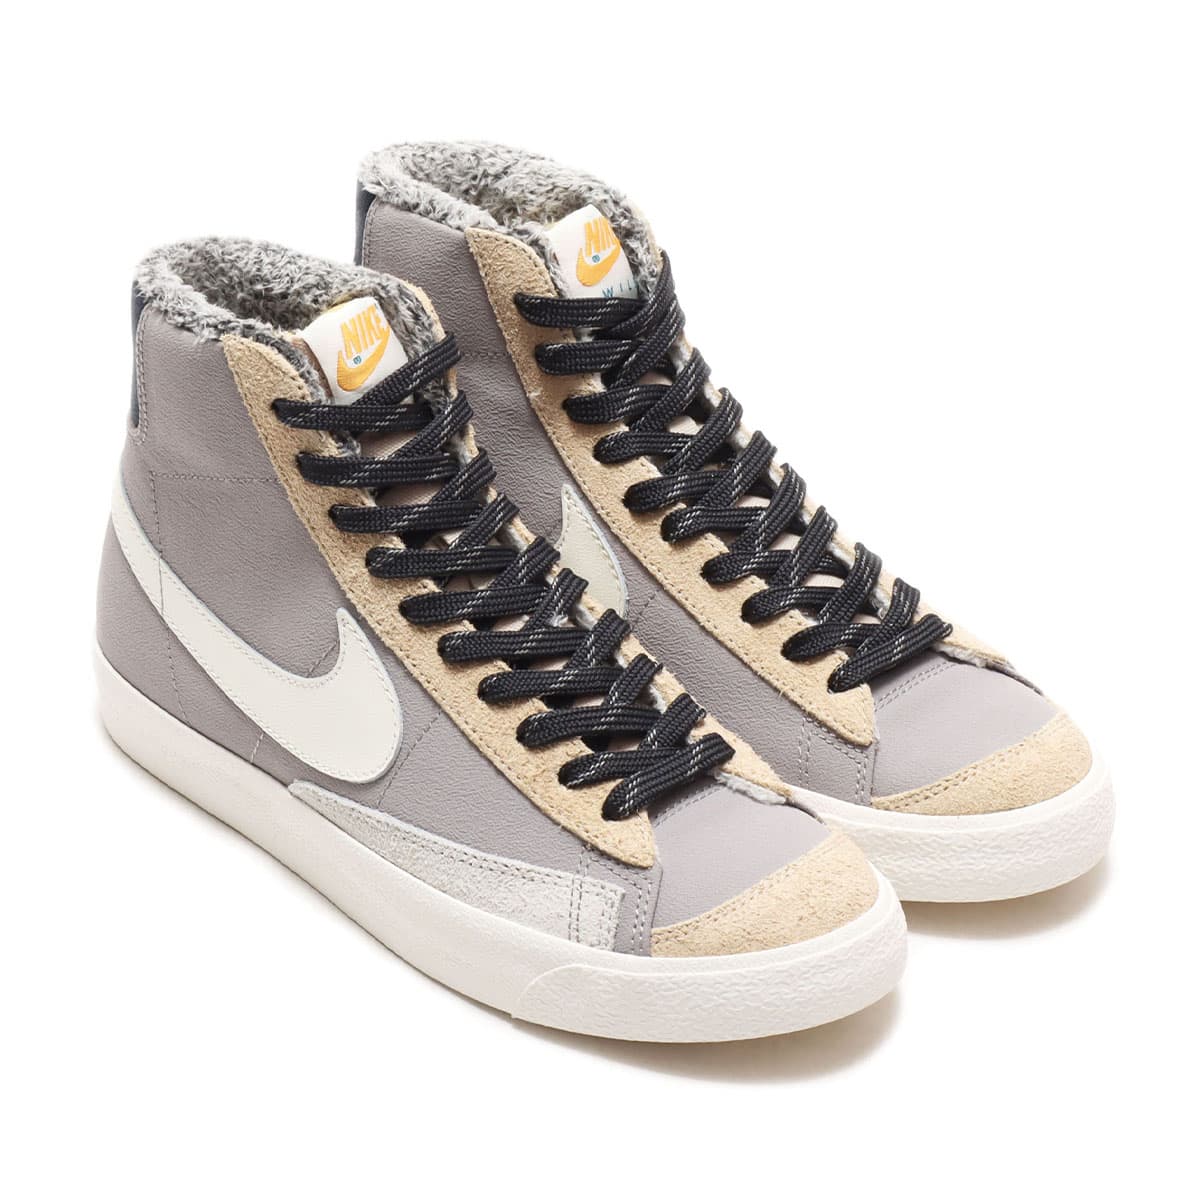 nike blazer 77 trainers in white and stone